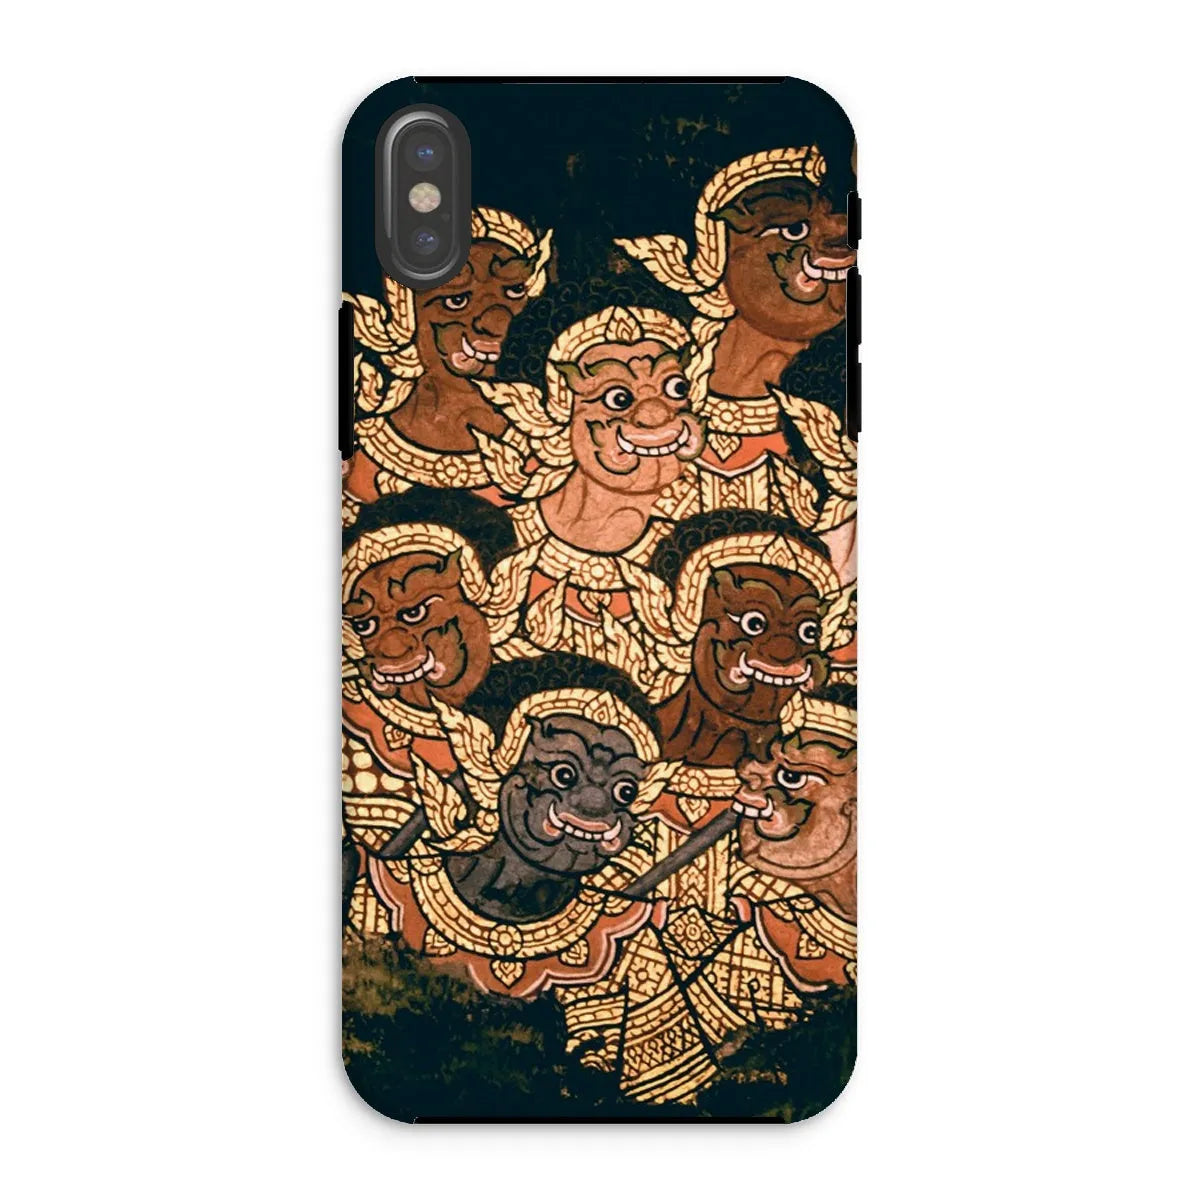 Babes In The Woods - Thailand Aesthetic Art Phone Case - Iphone Xs / Matte - Mobile Phone Cases - Aesthetic Art